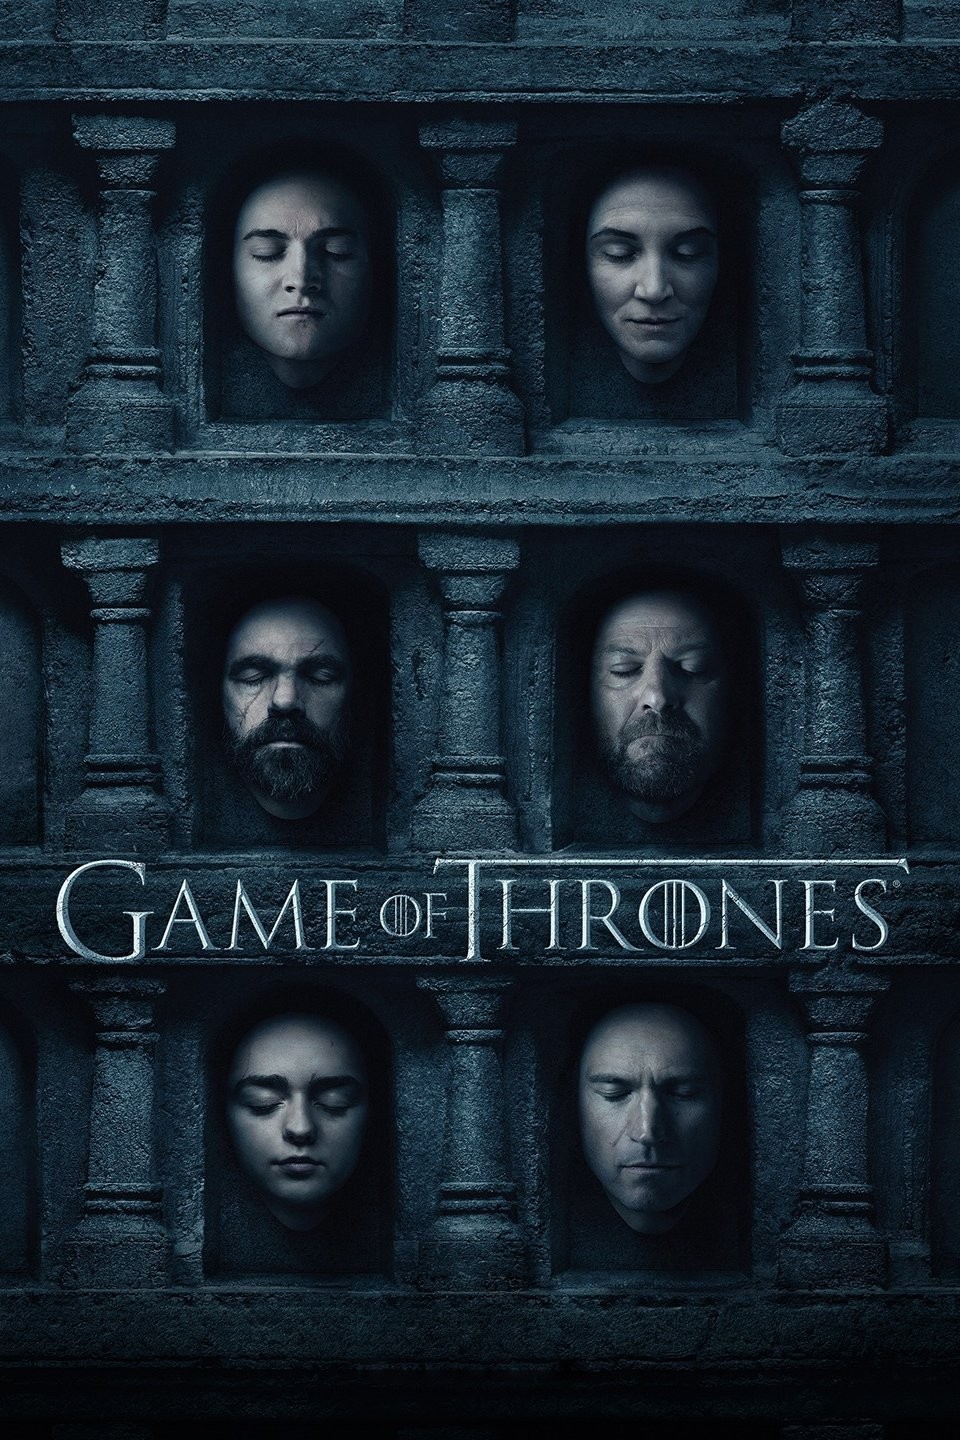 Game of ThronesYes I Watched it Again